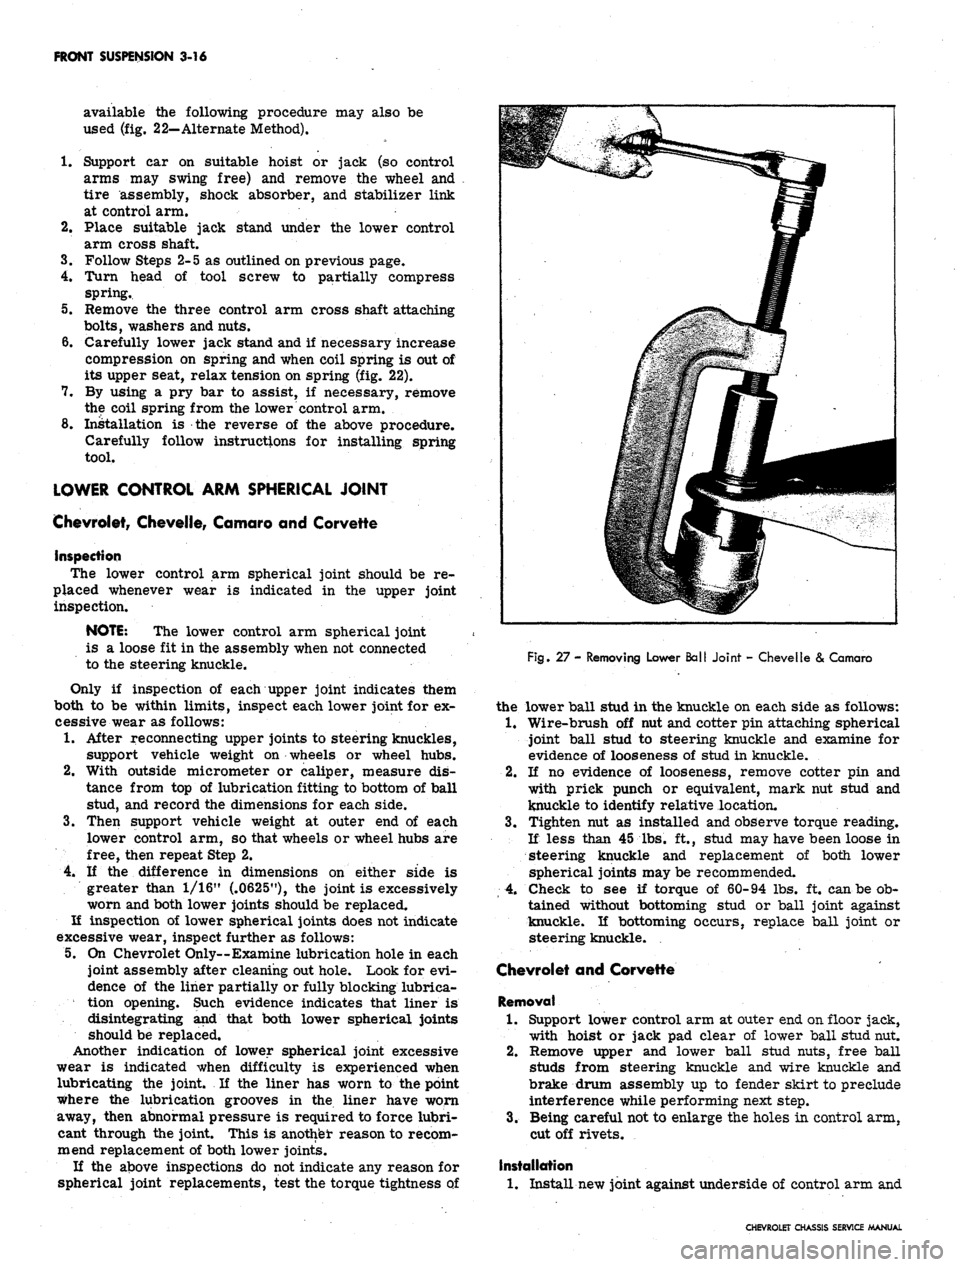 CHEVROLET CAMARO 1967 1.G Chassis Workshop Manual 
FRONT SUSPENSION 3-16

available the following procedure may also be

used (fig. 22-Alternate Method).

1.
 Support car on suitable hoist or jack (so control

arms may swing free) and remove the whee